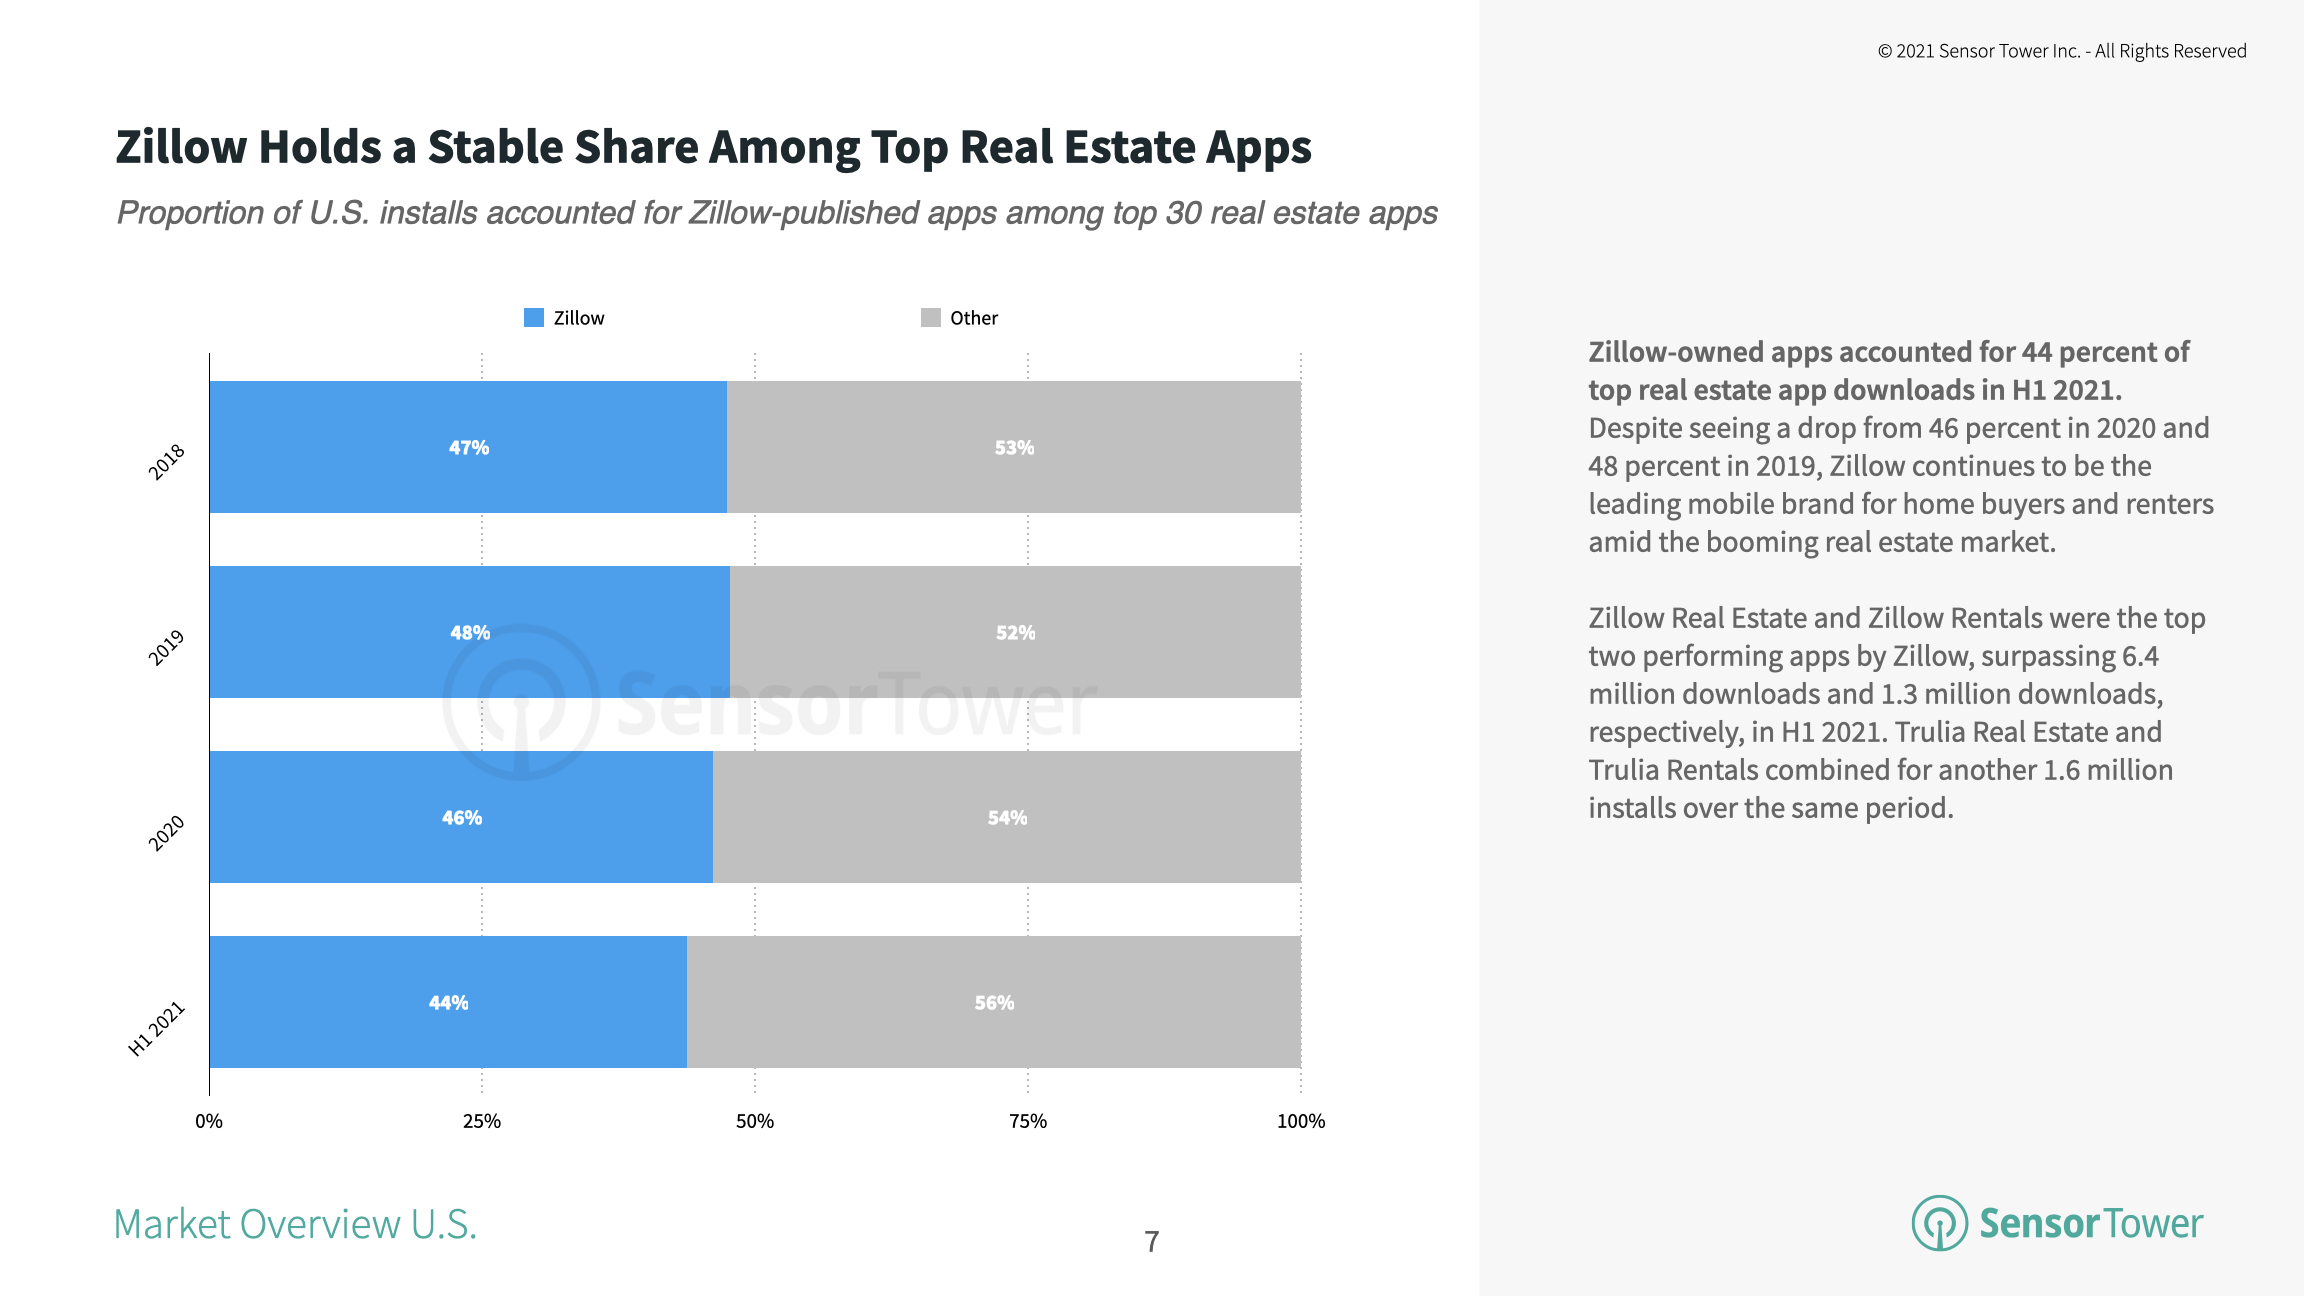 Zillow has maintained a majority share of U.S. installs for the past three years.